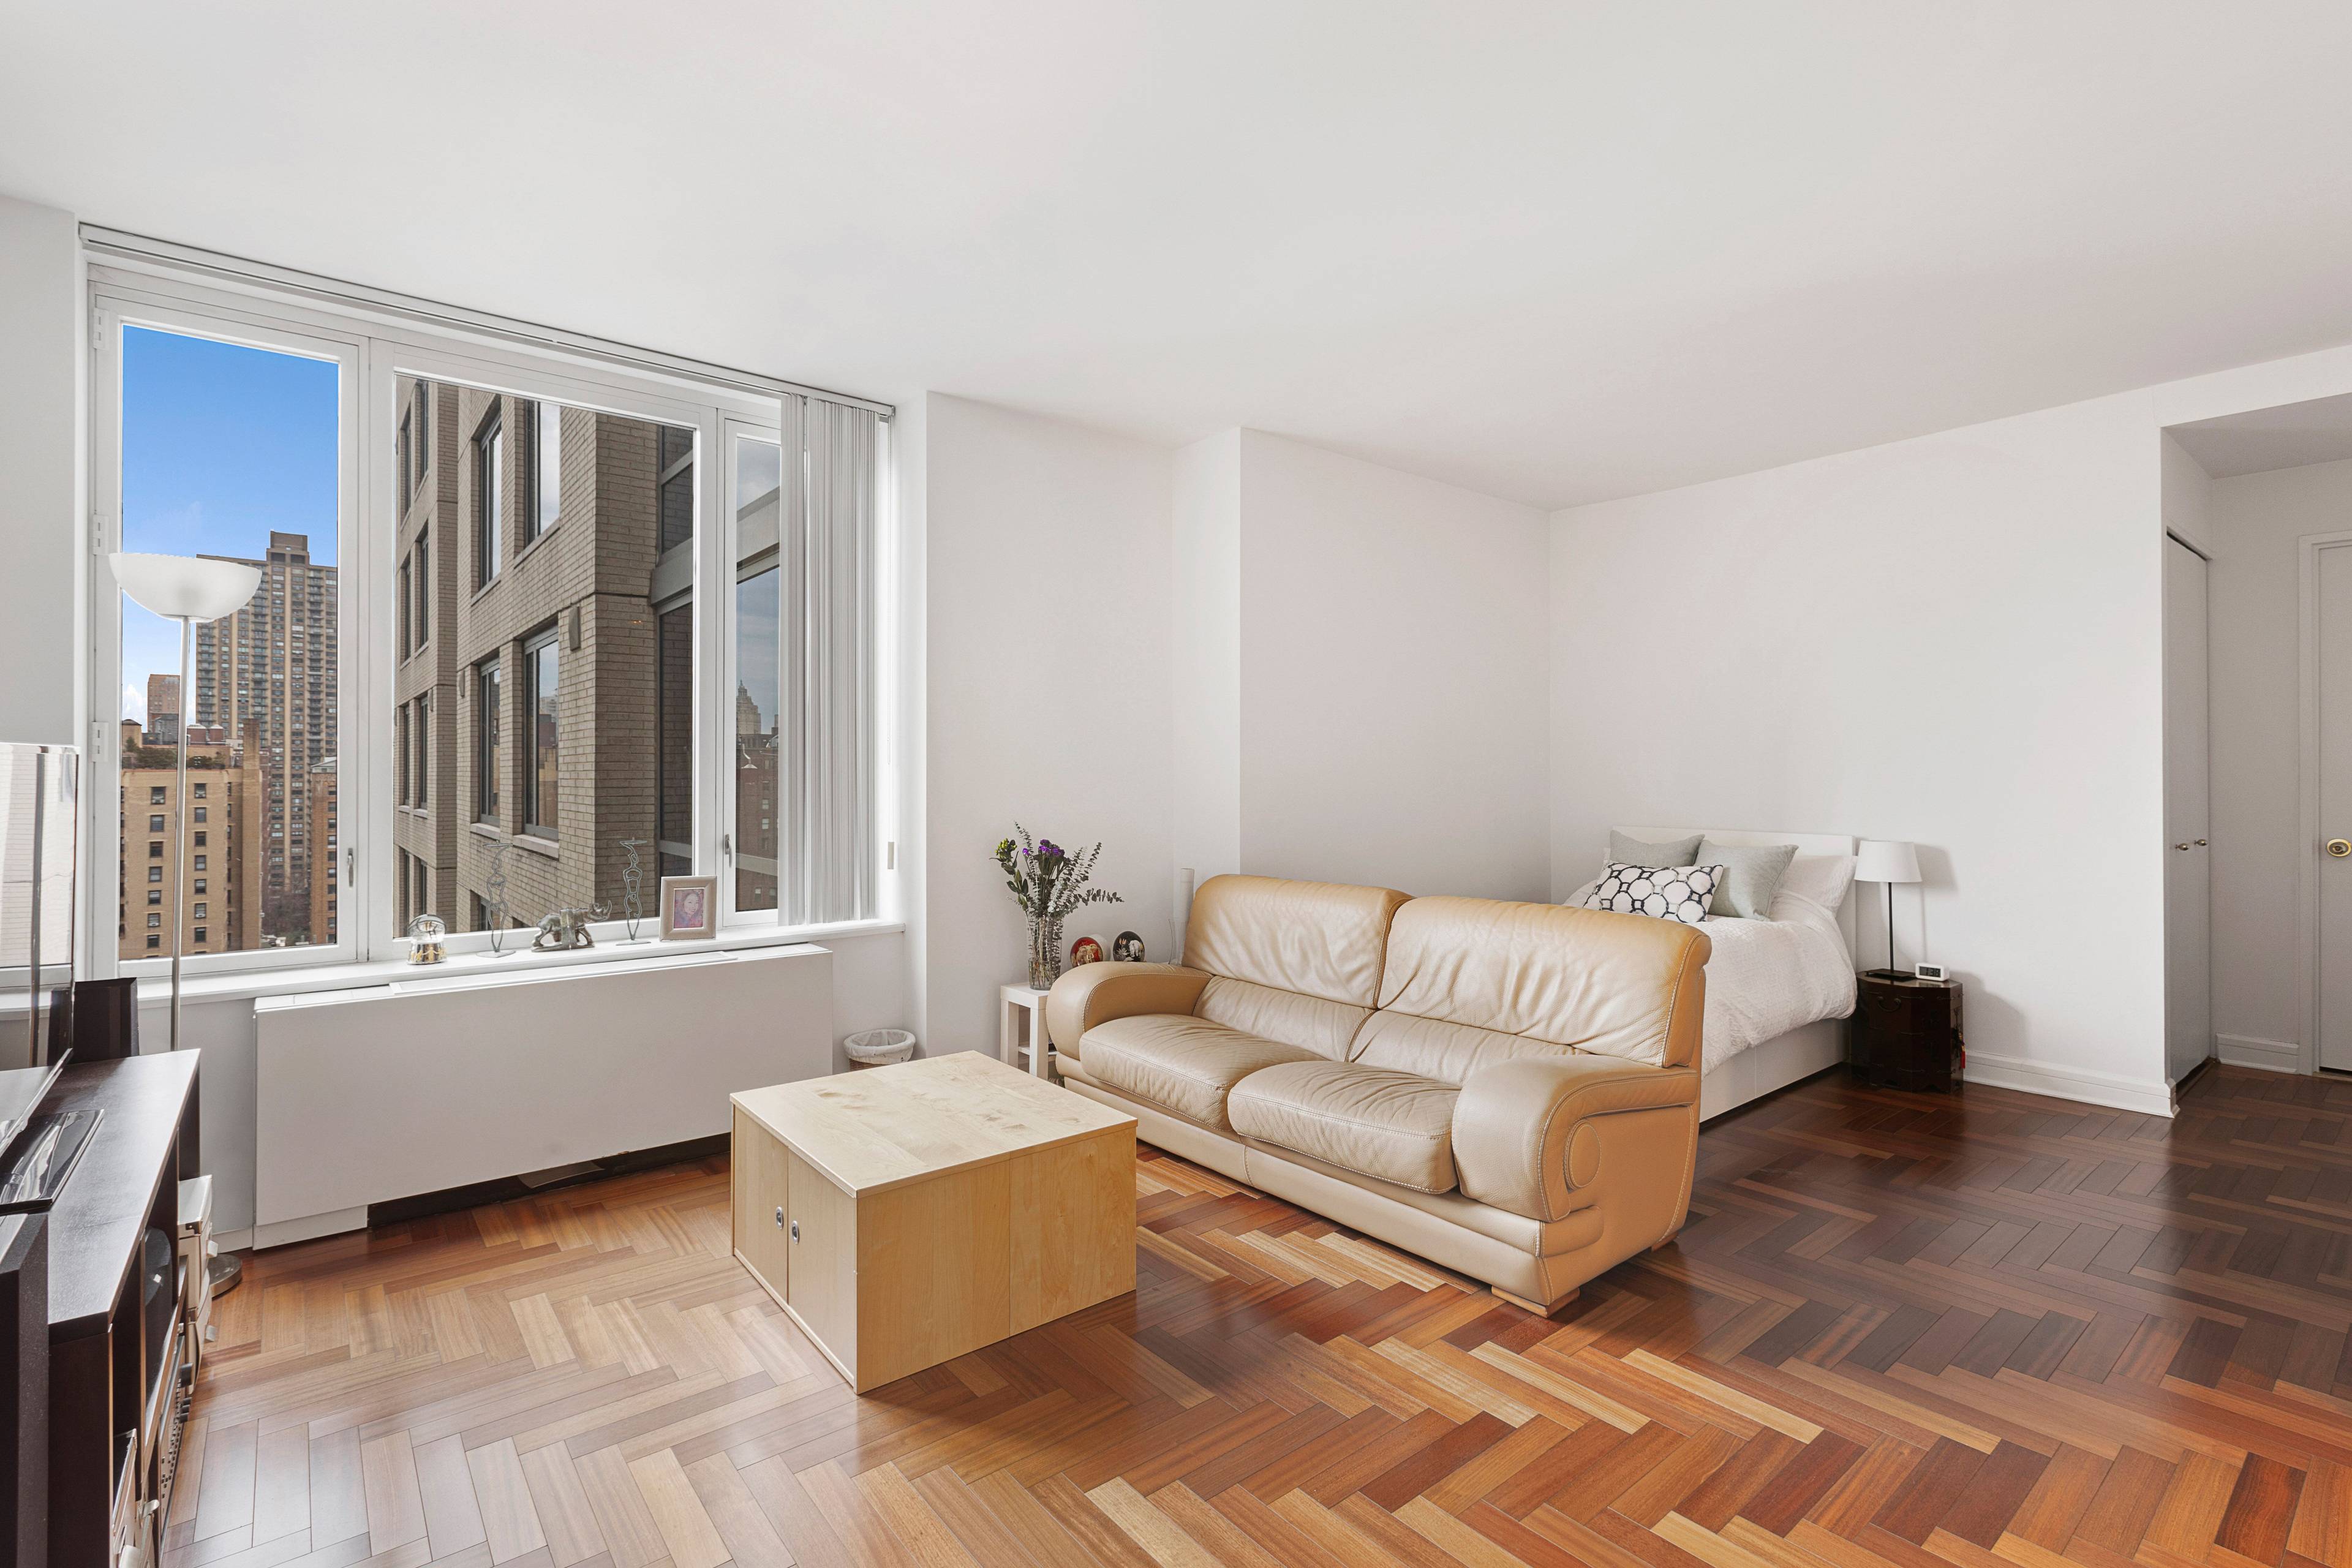 JUST LISTED! ALCOVE STUDIO WITH WALK IN CLOSET | UPPER WEST SIDE